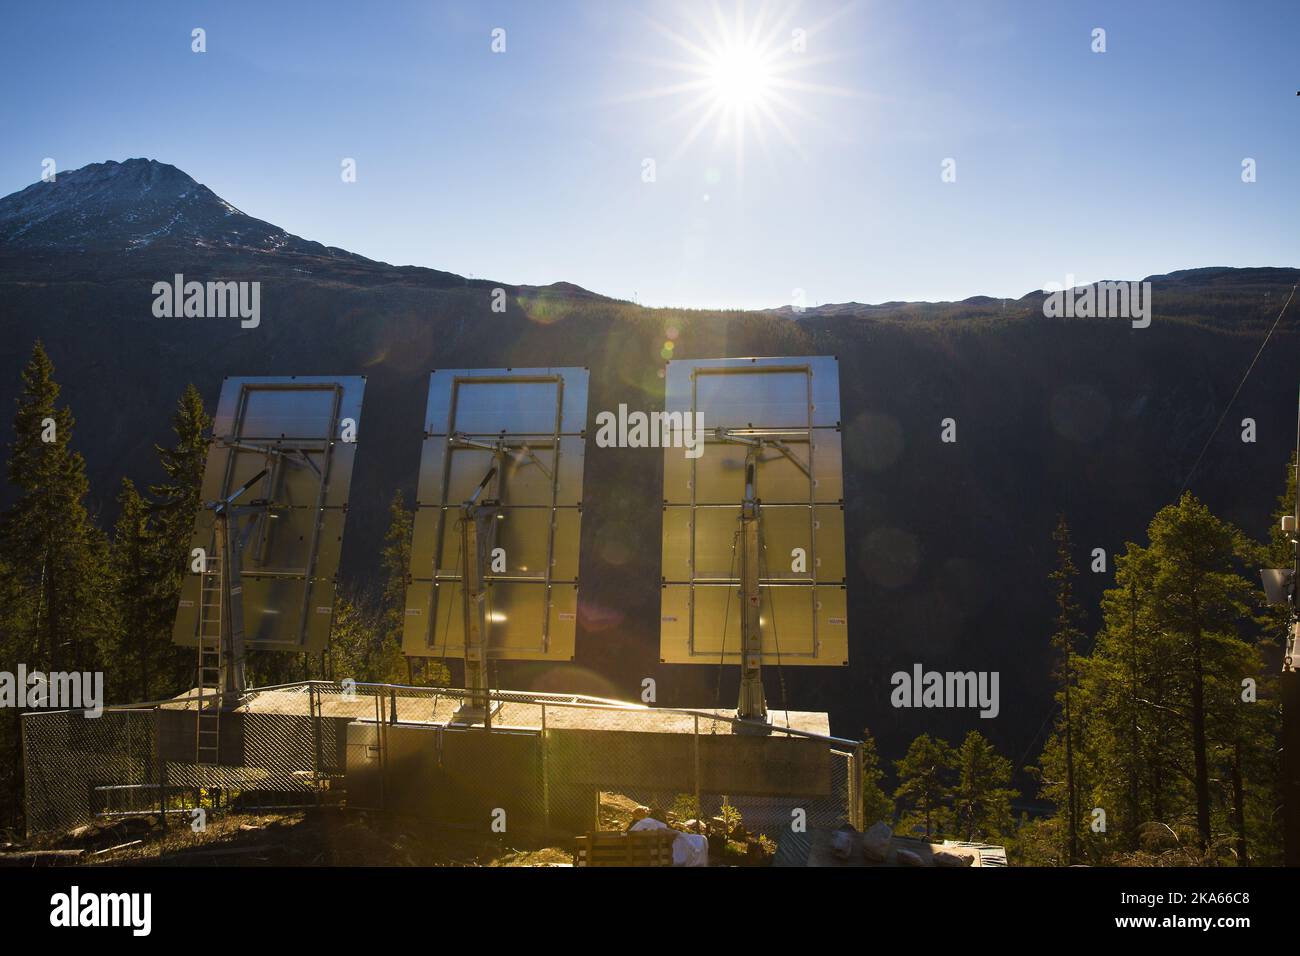 Three giant mirrors errected on the mountainside above the industrial town Rjukan, Norway, reflect sunshine towards the center of the town, October 18, 2013. Rjukan, known among other things for its darkness in winter, is located in the bottom of a valley between steep mountains in Telemark County, some 150 km west of Oslo. The idea about mirrors reflecting sunshine to the town in winter was launched 100 years ago and it now becomes a reallity by official opening on October 31st. Stock Photo